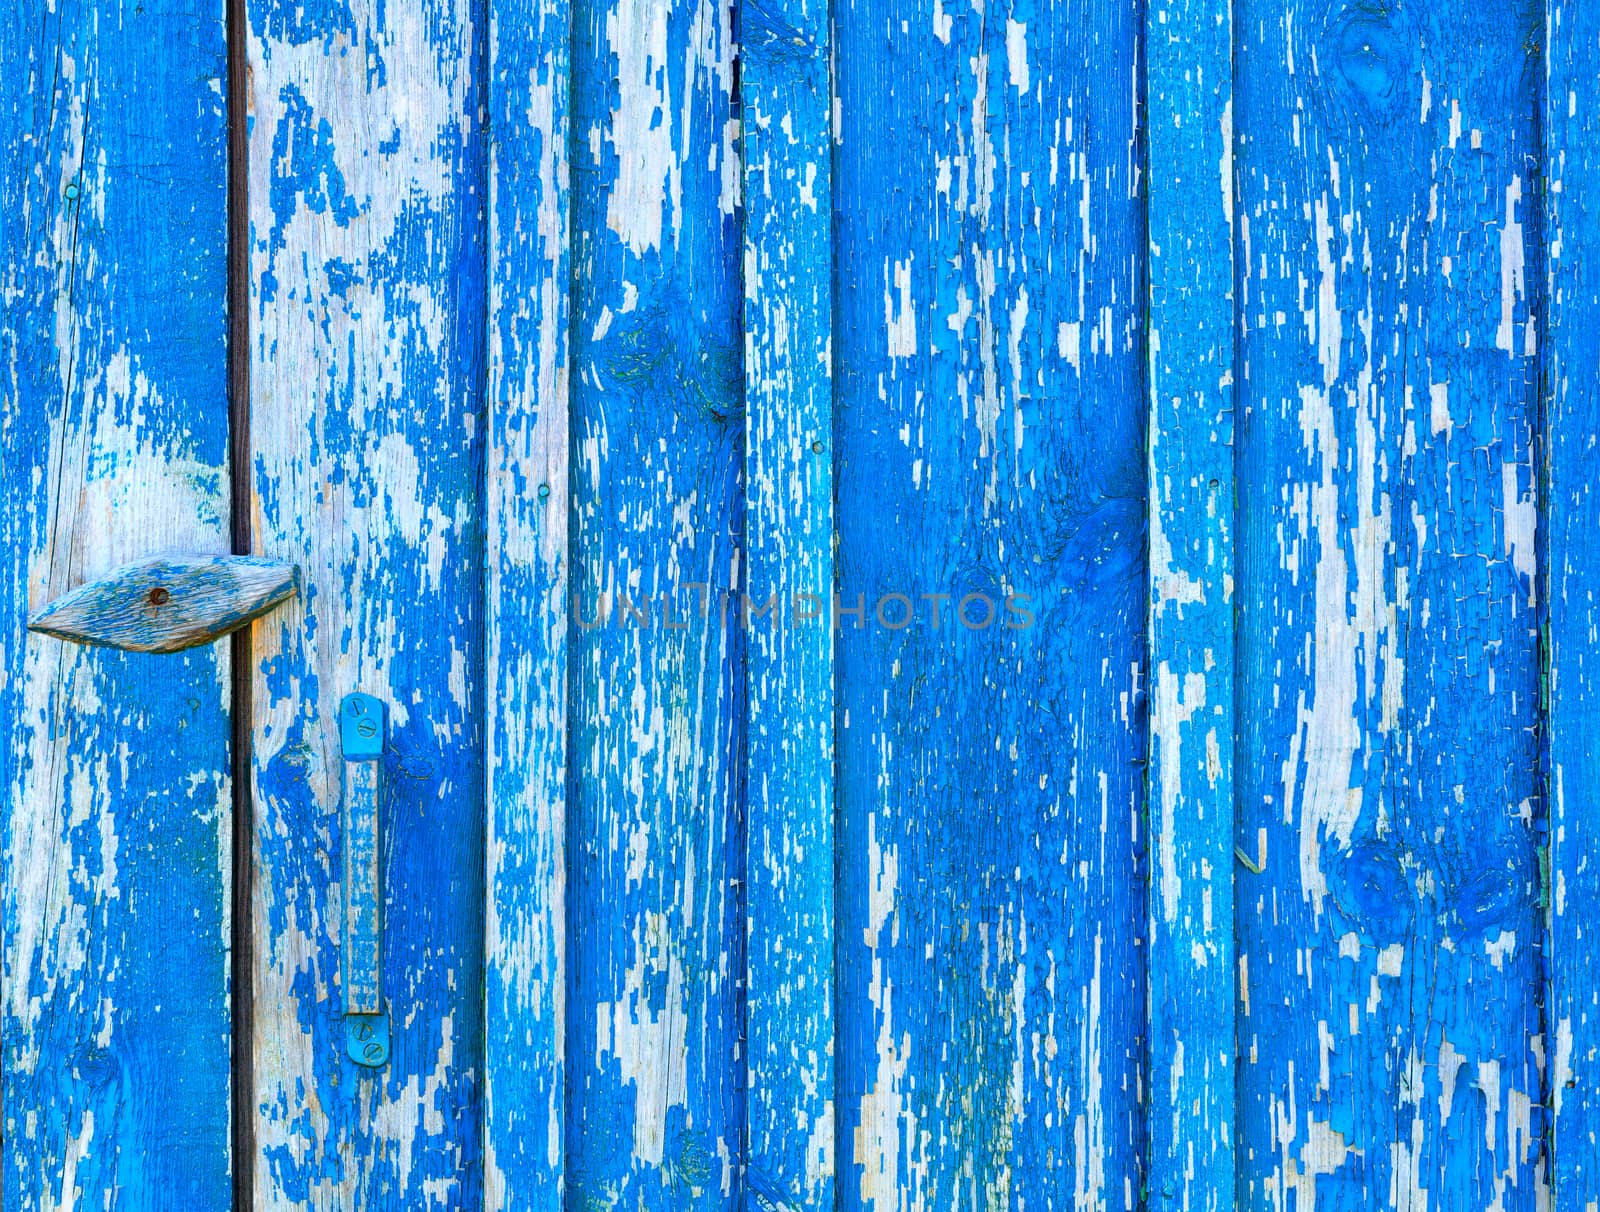 The old wooden texture is painted with blue weathered and peeling paint.